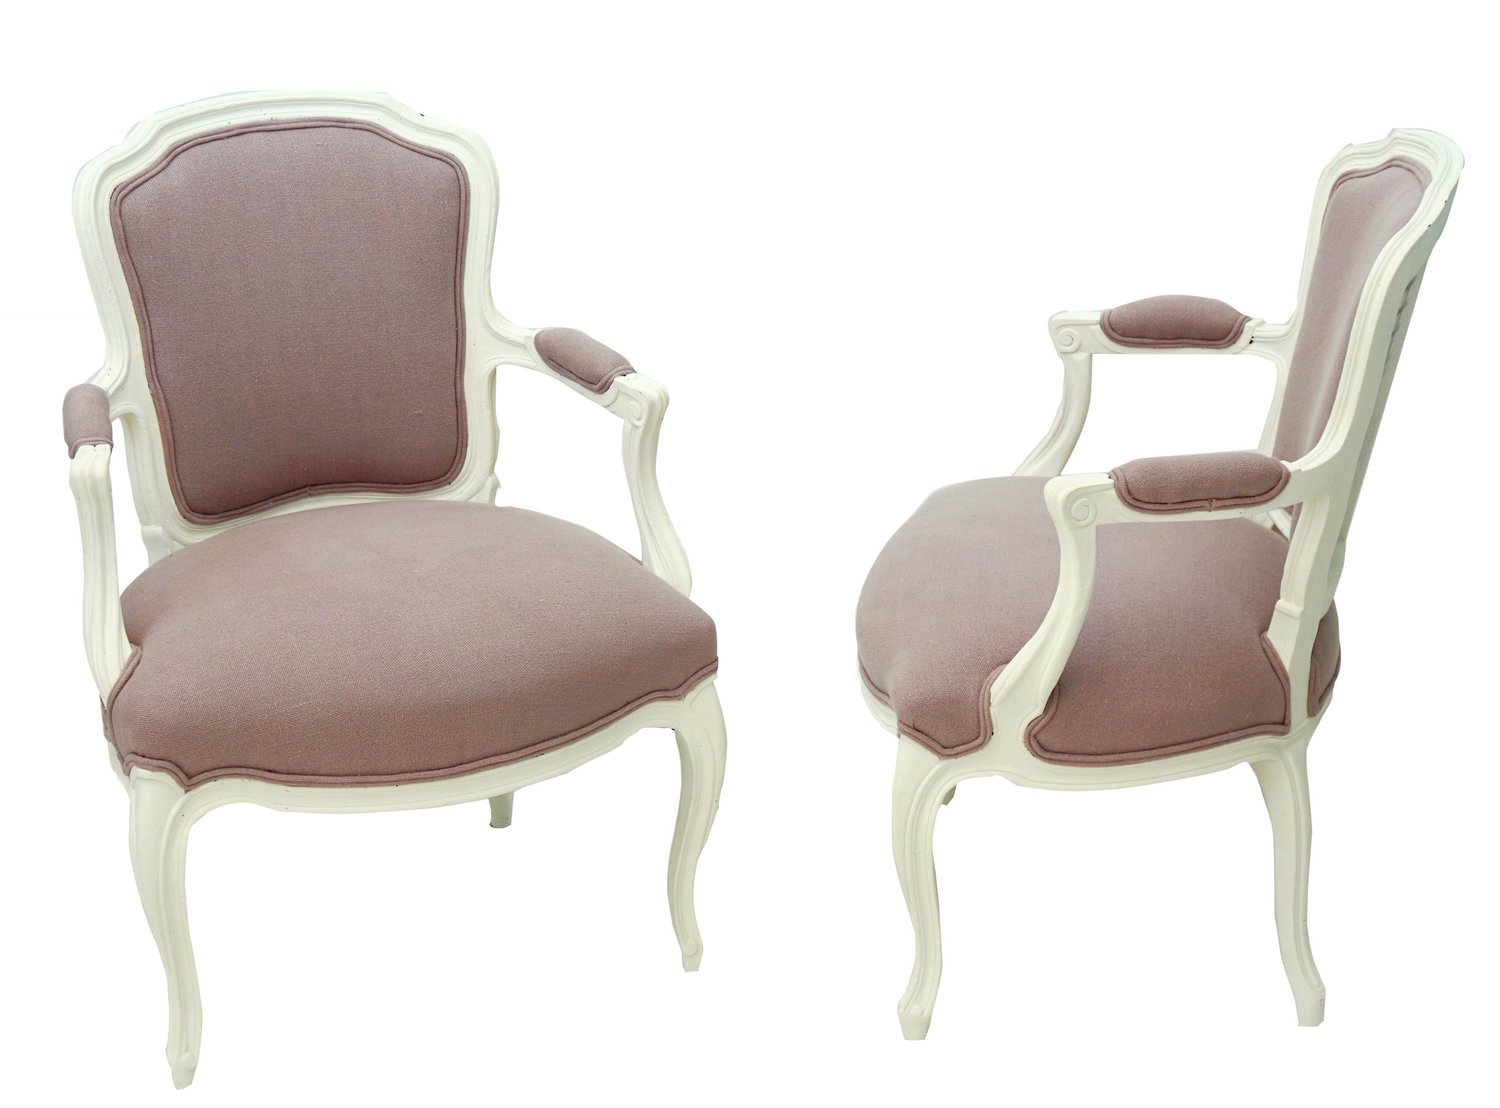 Vintage French Louis Xv Style Armchairs, Vintage Louis Xv Chairs